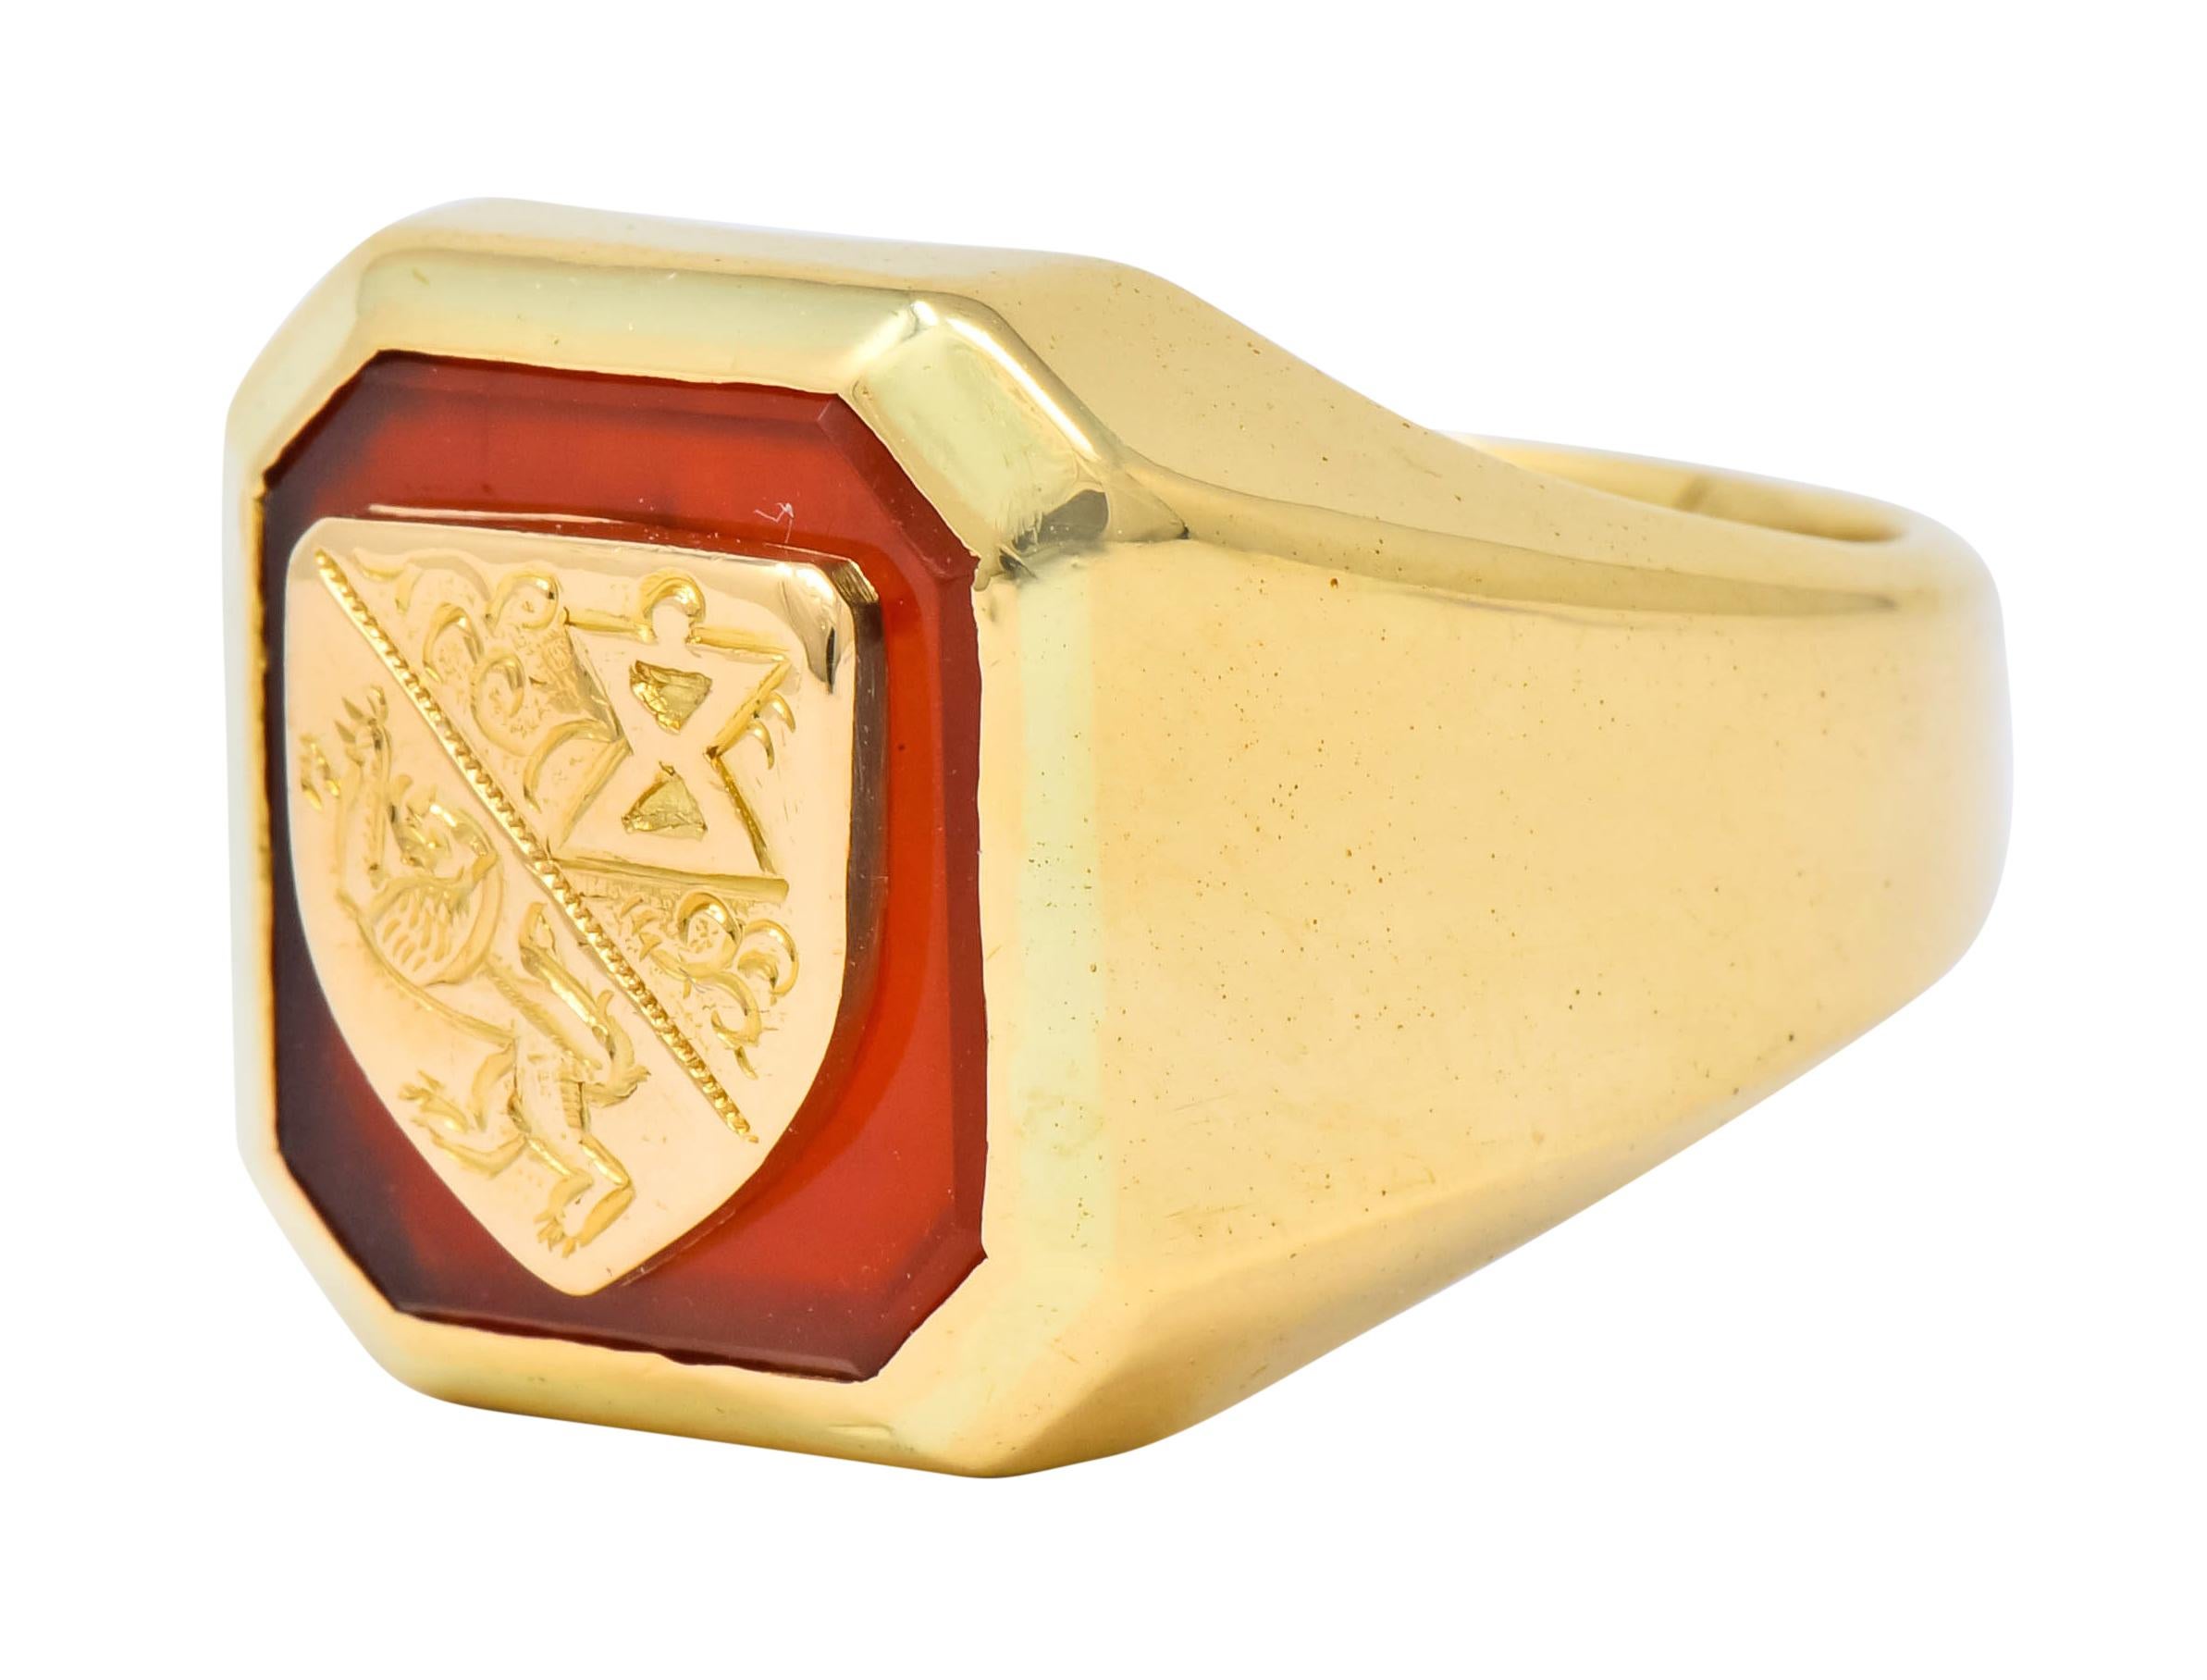 Signet style ring with bezel set square cut carnelian tablet measuring approximately 9/16 x 9/16 inch, translucent and reddish-orange in color

Carnelian centers a raised yellow gold shield, bisected diagonally depicting a roaring lion and hour